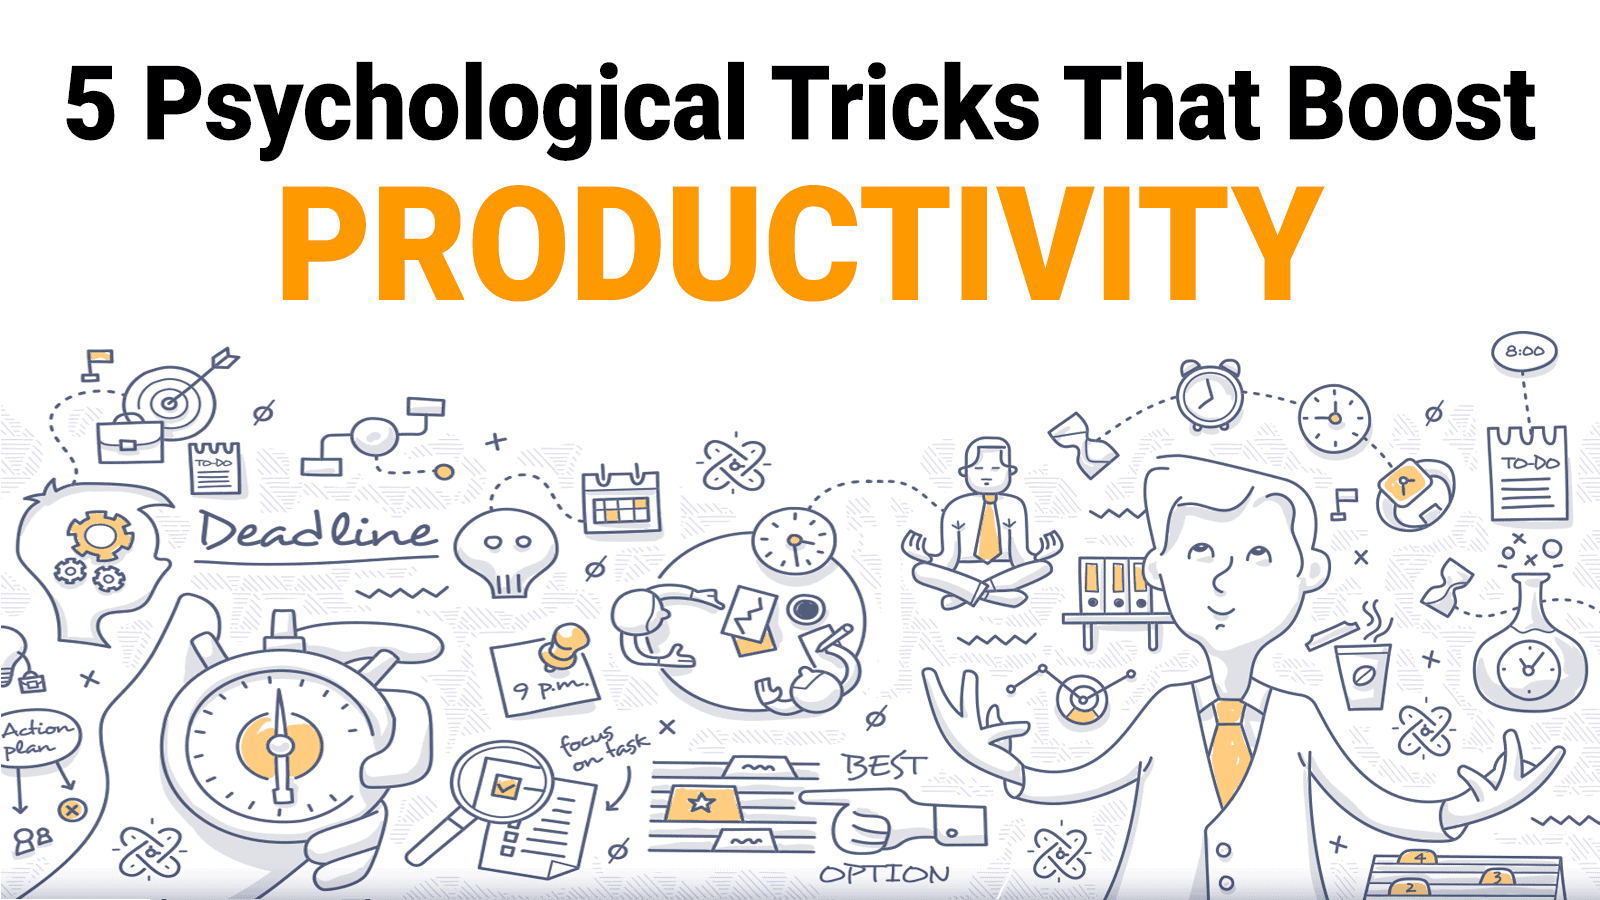 5 Psychological Tricks That Boost Productivity